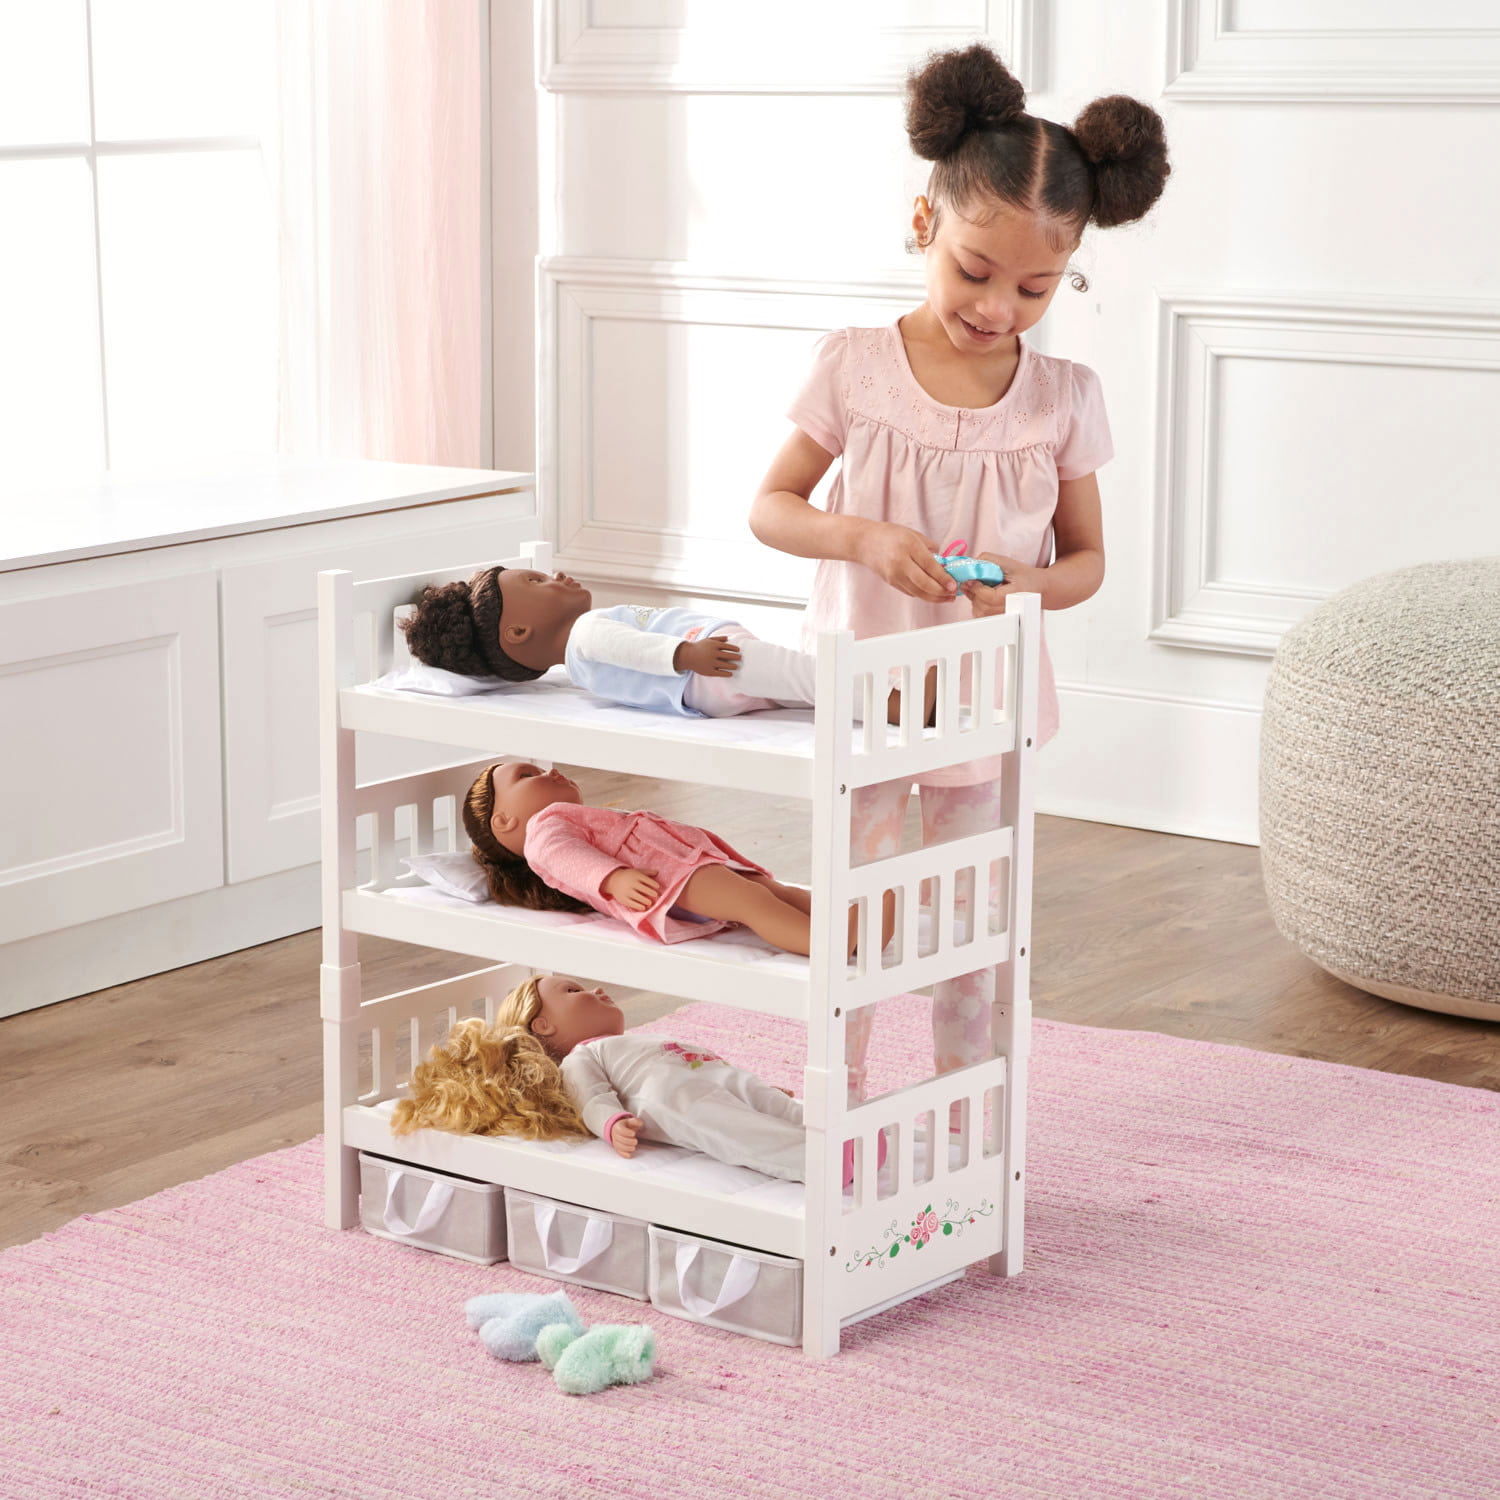 Badger Basket 1-2-3 Convertible Doll Bunk Bed with Baskets and Free  Personalization Kit - Executive Gray-Color:White Rose,Material:100%  Polyester Fabric 